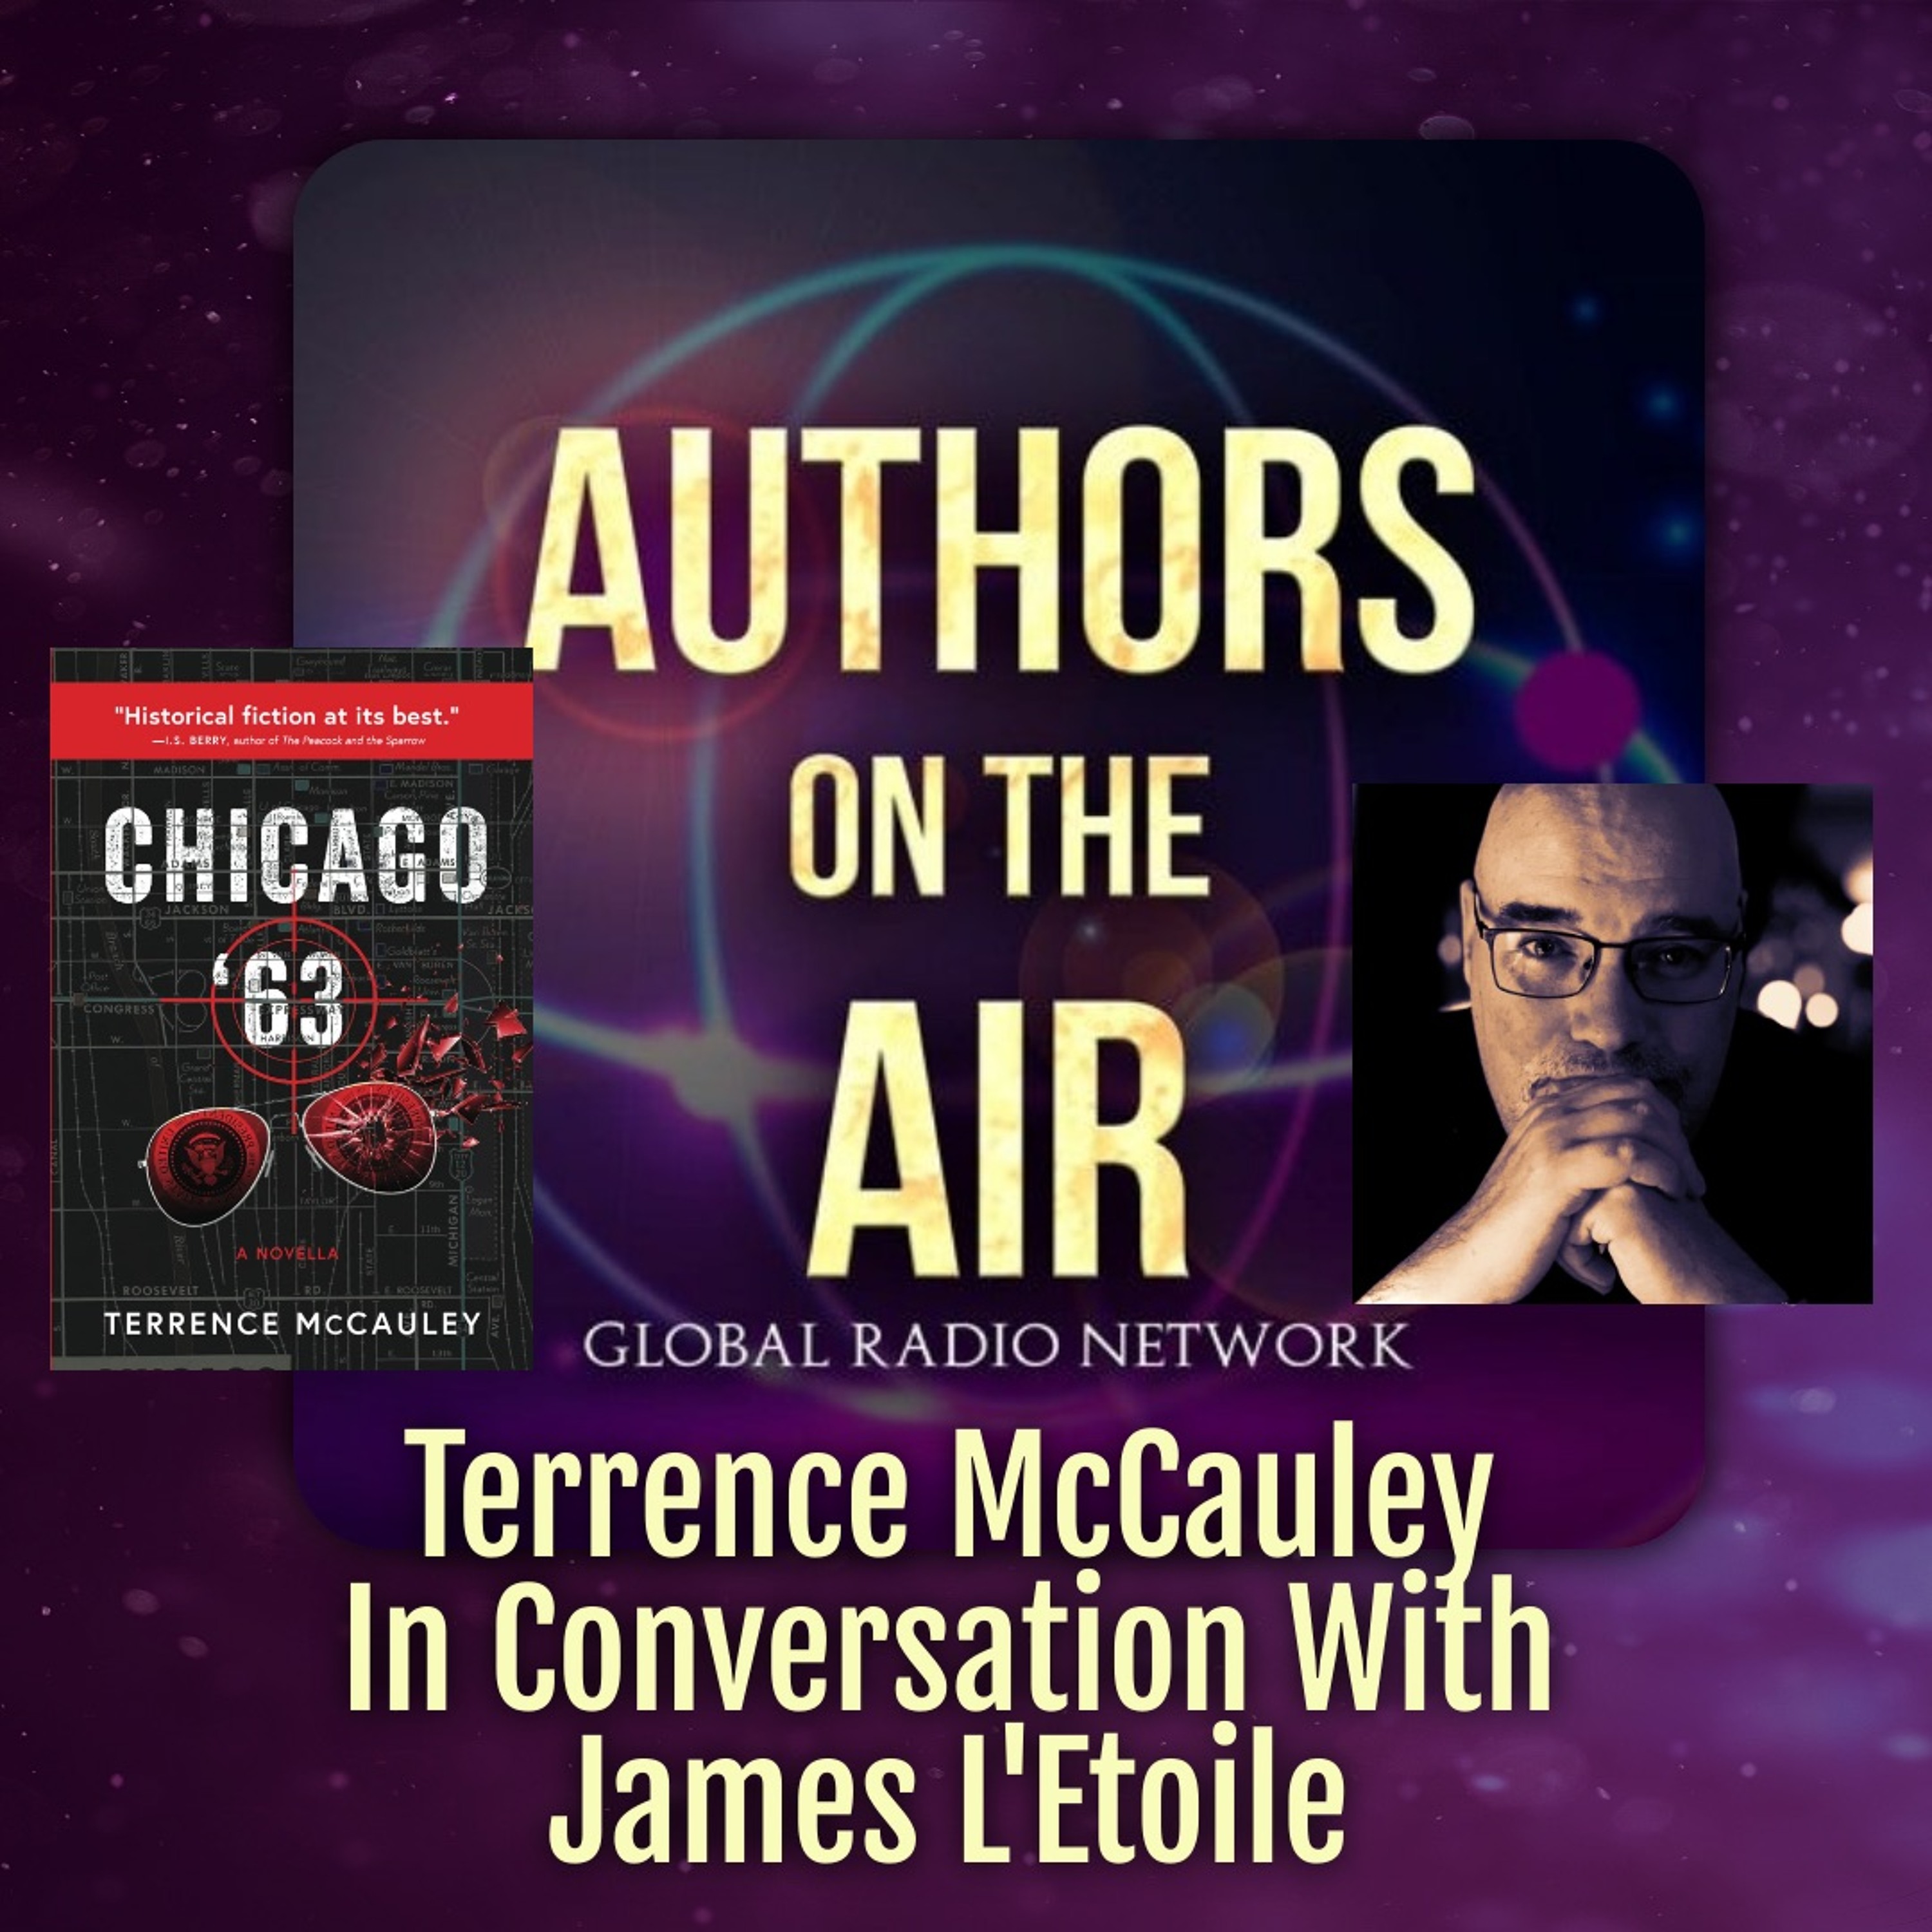 Terrence McCauley - Chicago '63 Authors on the Air